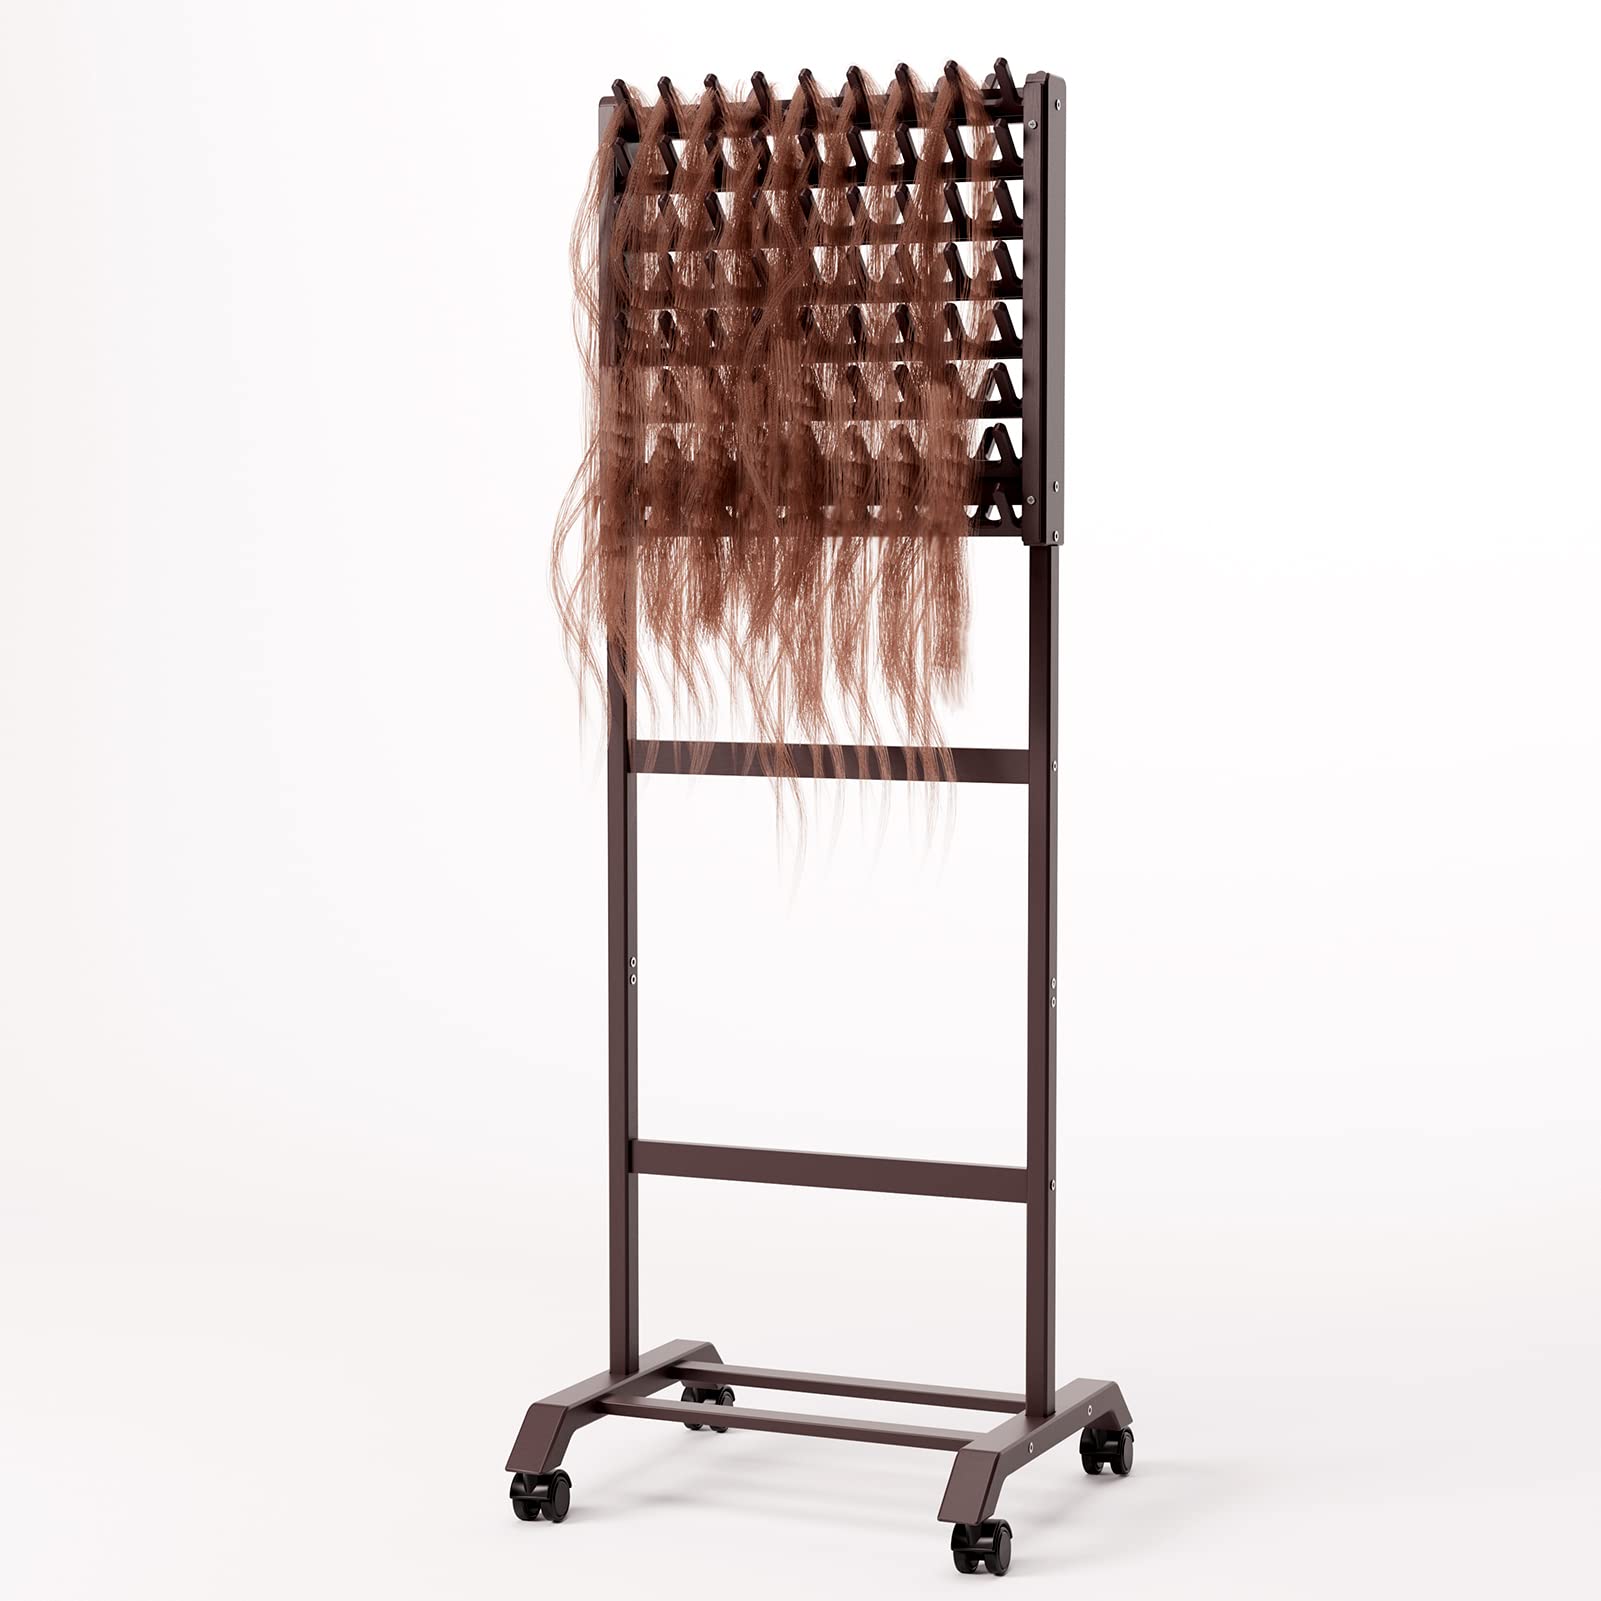  Yumkfoi 144 Pegs Braiding Hair Rack, Standing Hair Extension  Holder, Wooden Hair Holder with 4 Wheels and 2 Storage Shelf for Braiding  Hair, Two Sided Braid Rack Hair Separator Stand for